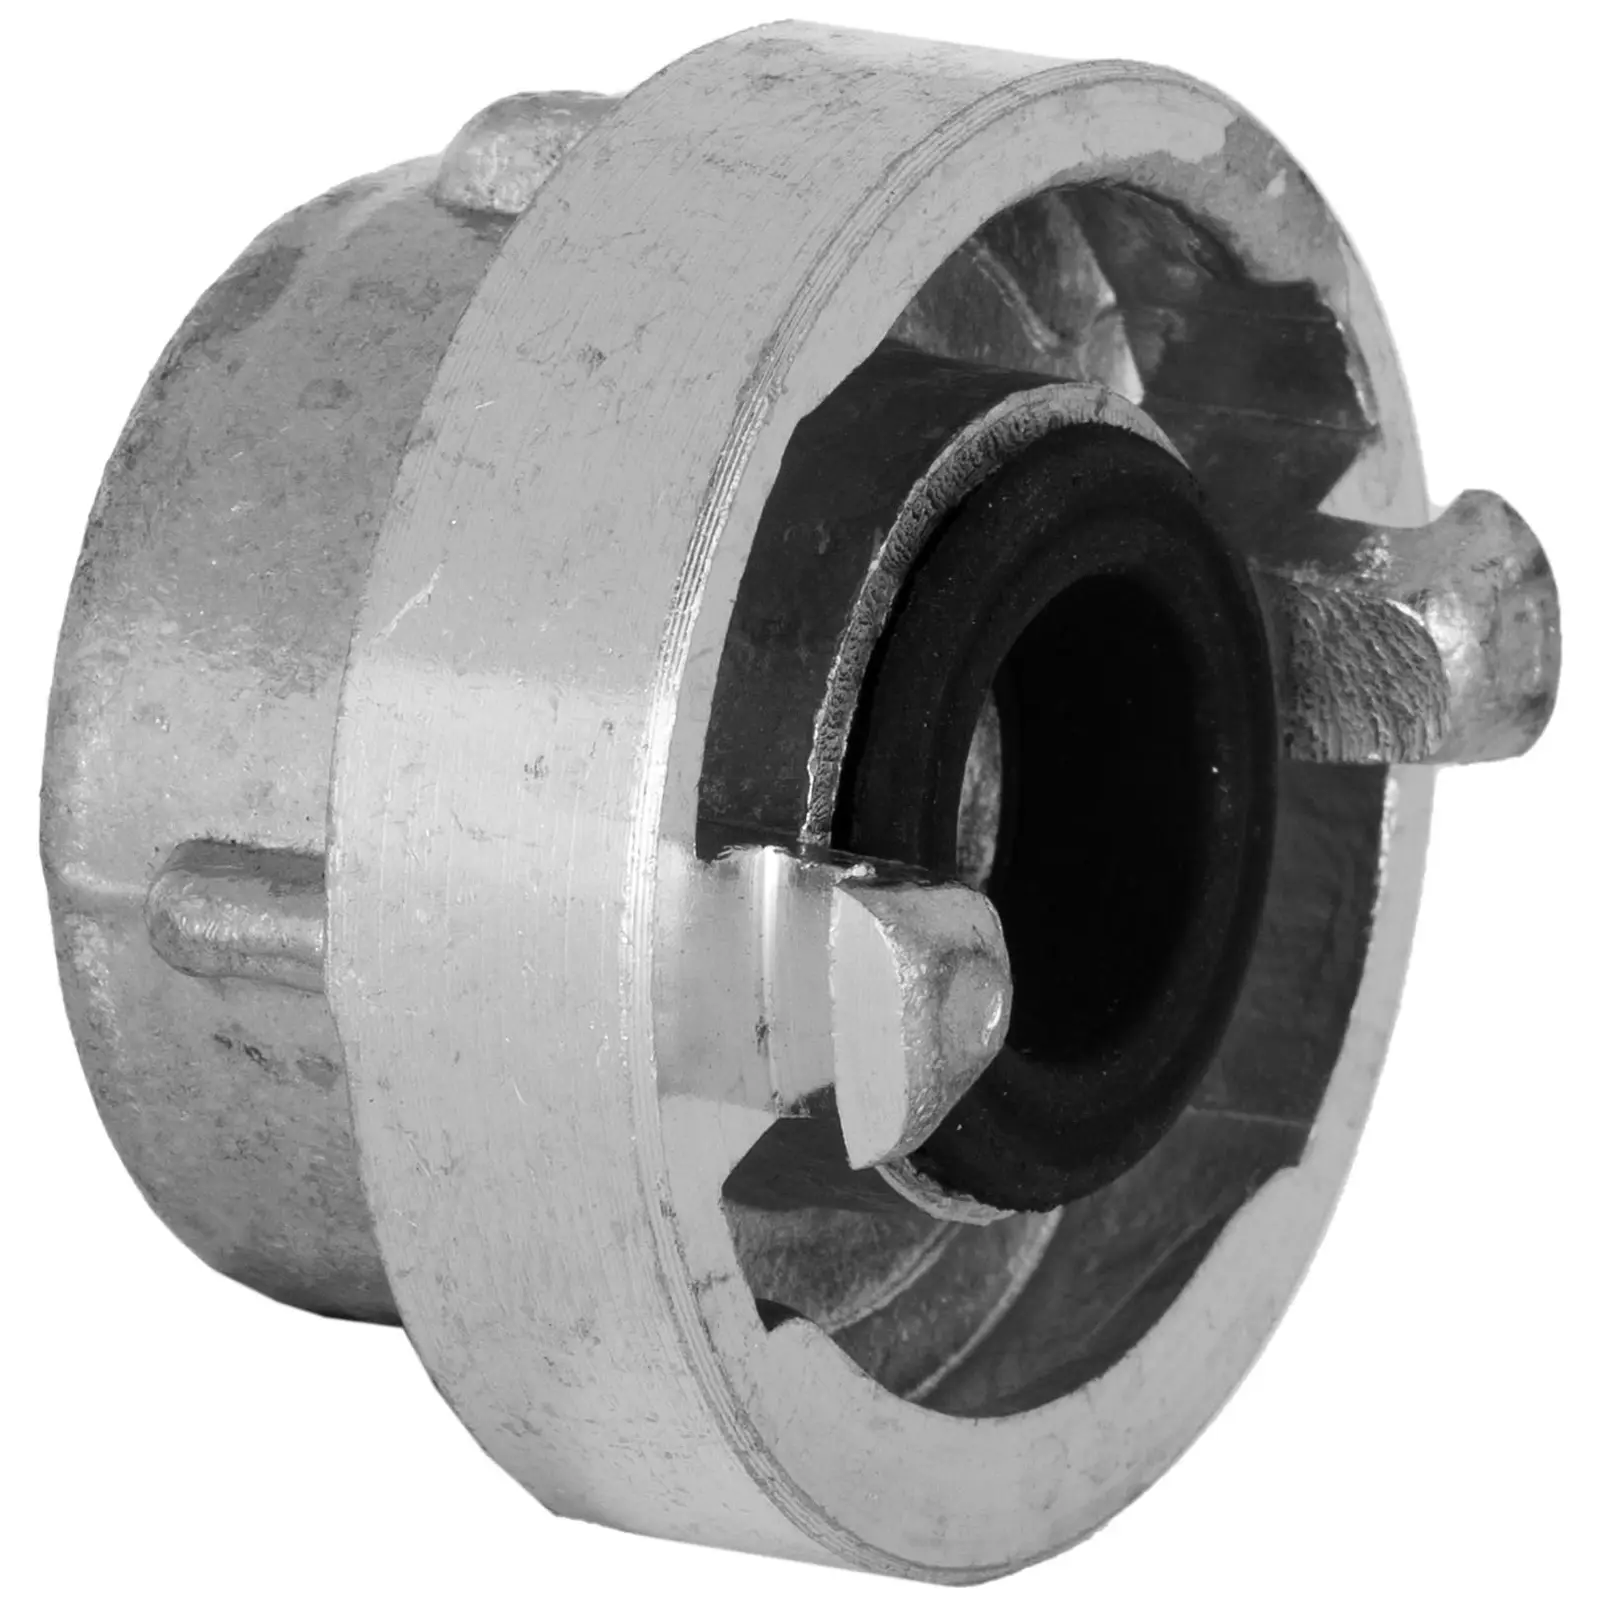 Fixed Coupling with internal thread - hose size 1 "- Storz